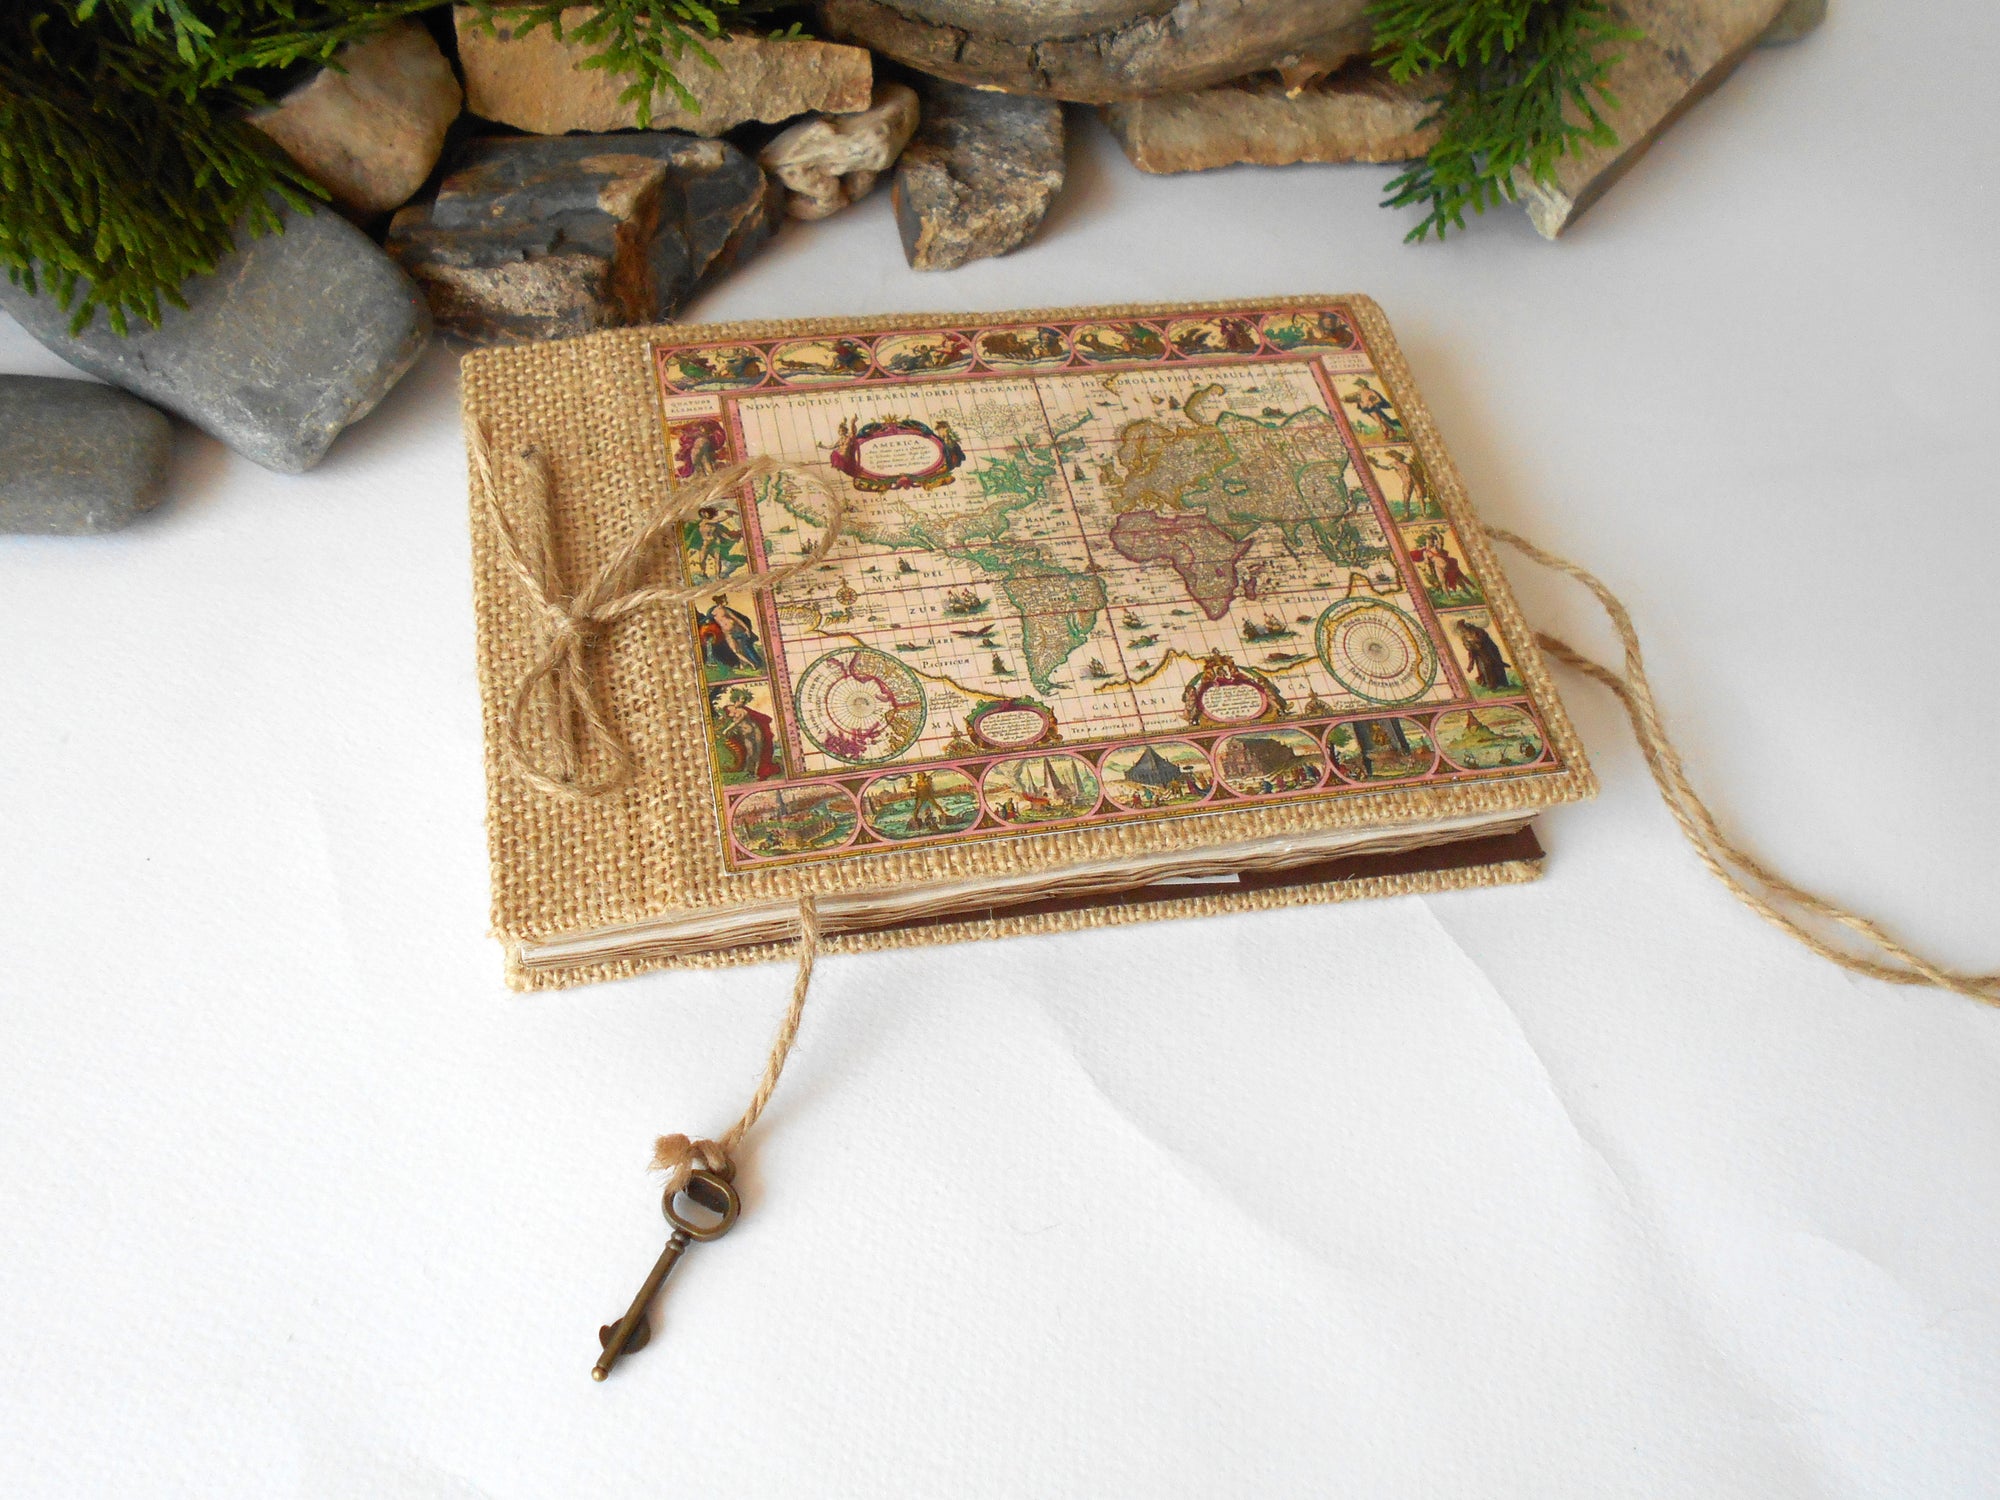 Burlap sketchbook with hardcover and a world map- rustic fabric journal- coffee 100% recycled pages- eco-friendly refillable sketchbook